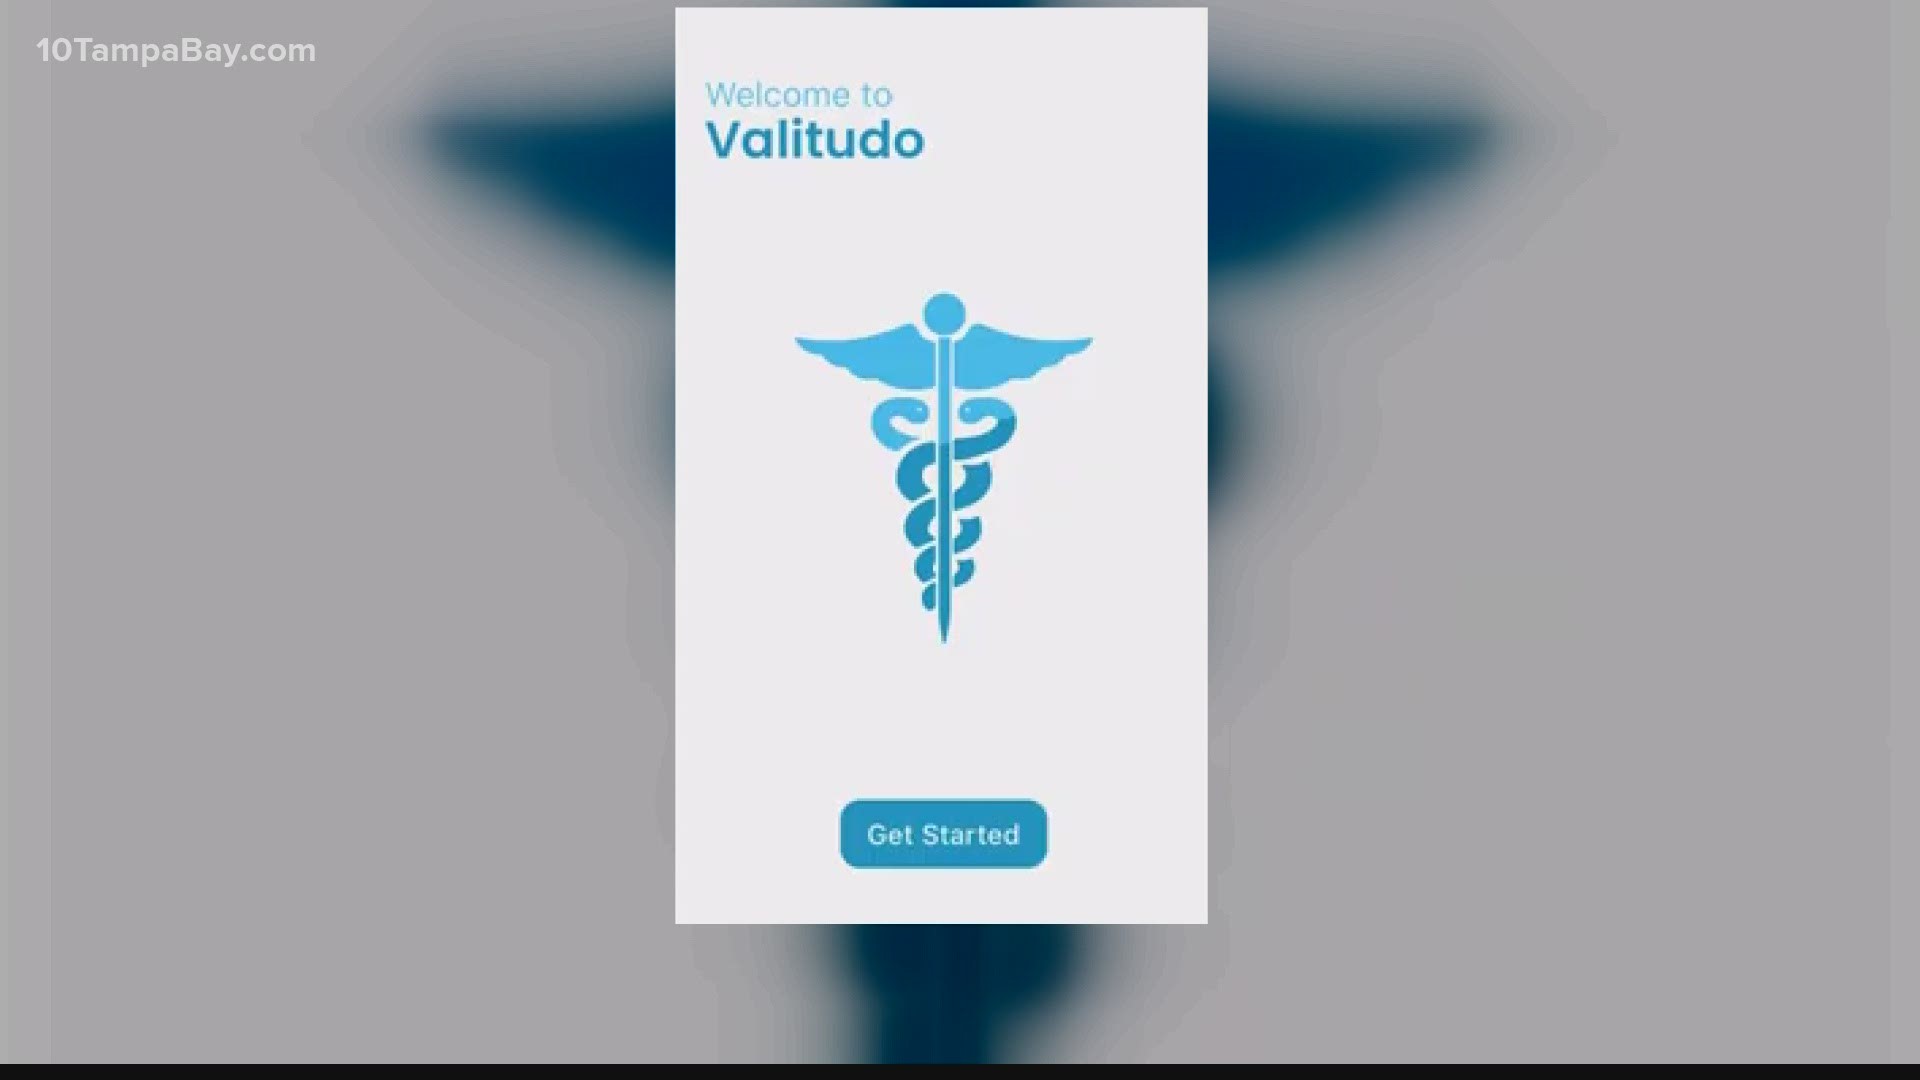 The idea behind this app came after a friend of theirs nearly died from a miscalculated medical dosage.